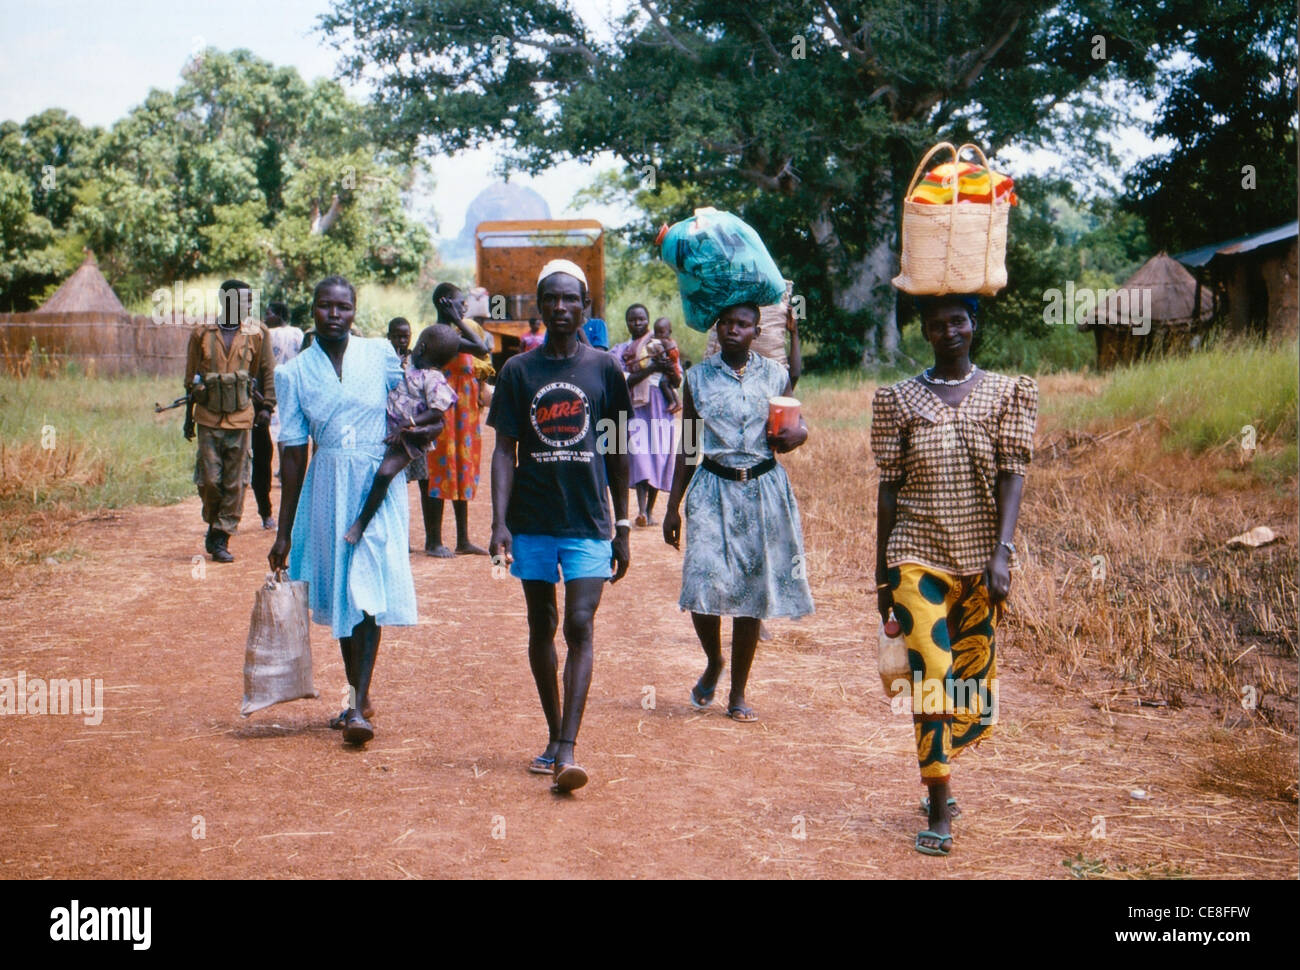 Sudanese villagers in Southern Sudan, Africa carrying items back from a ...